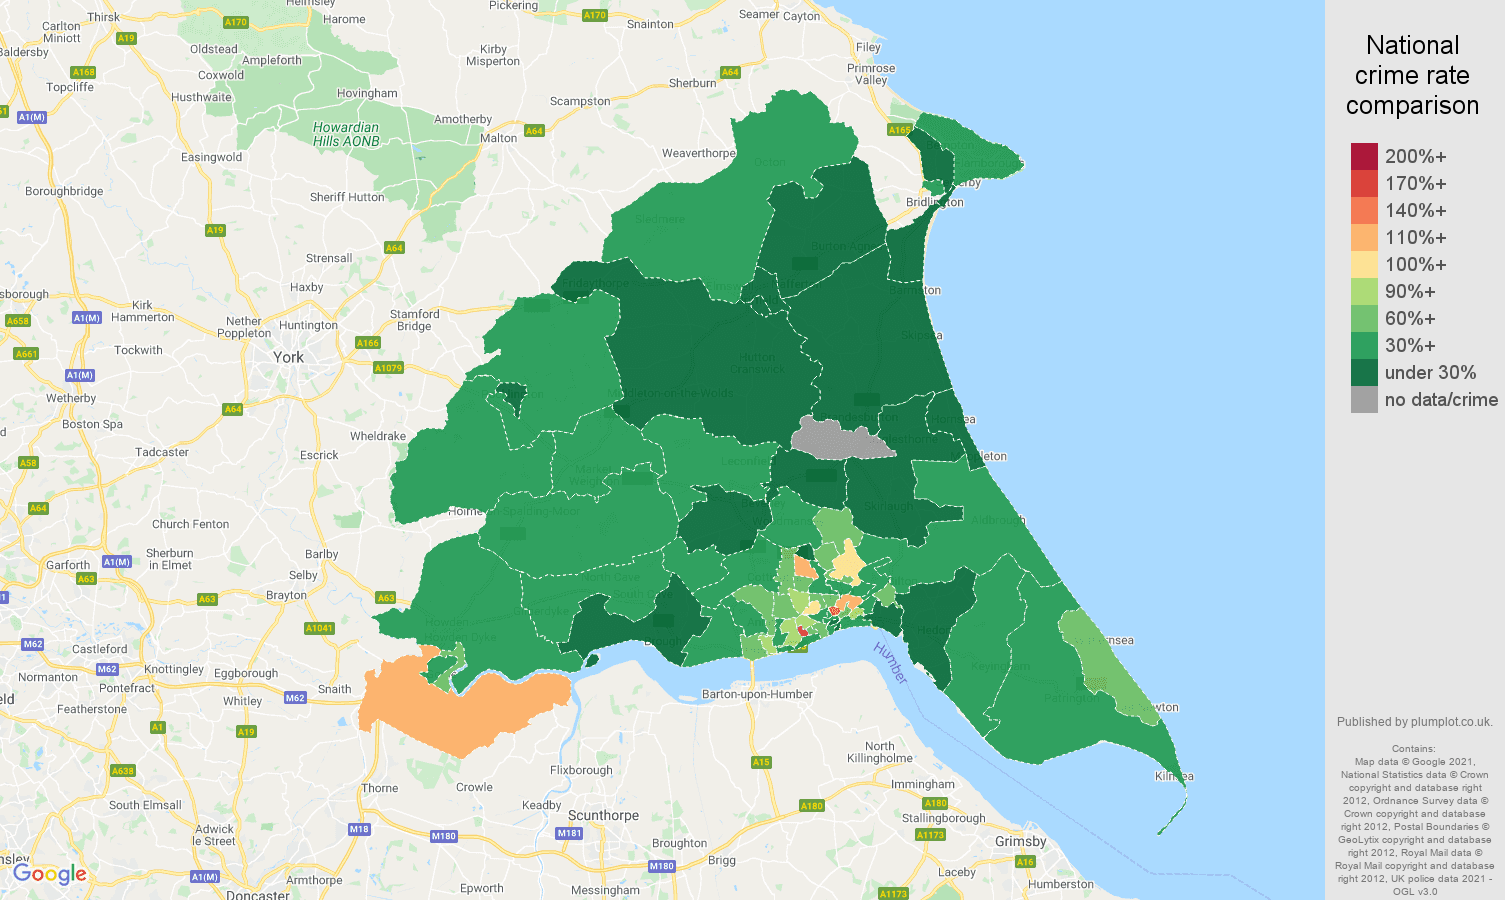 East Riding of Yorkshire vehicle crime rate comparison map